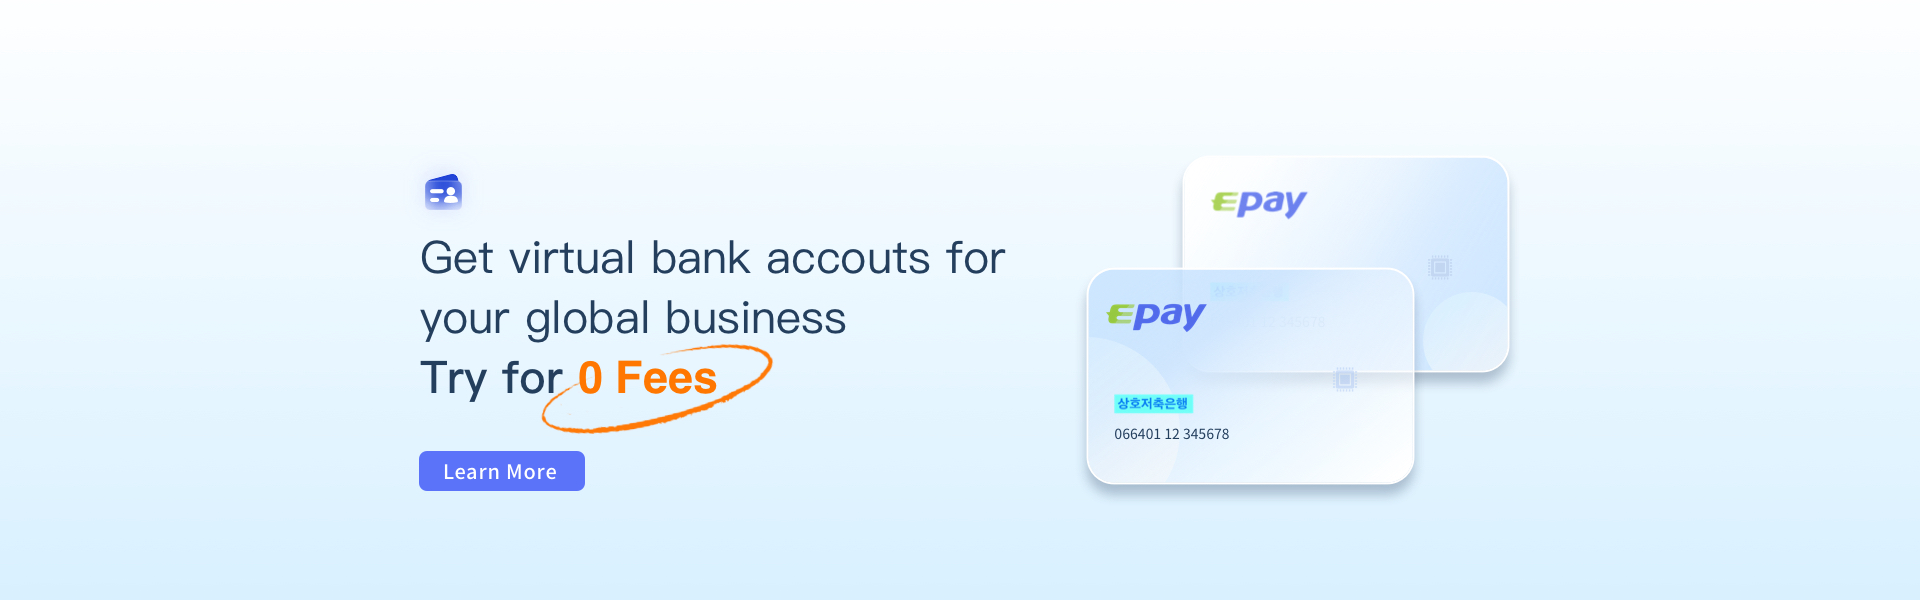 Get an Online Bank Account for Your Global Bussiness. Try for No Fees